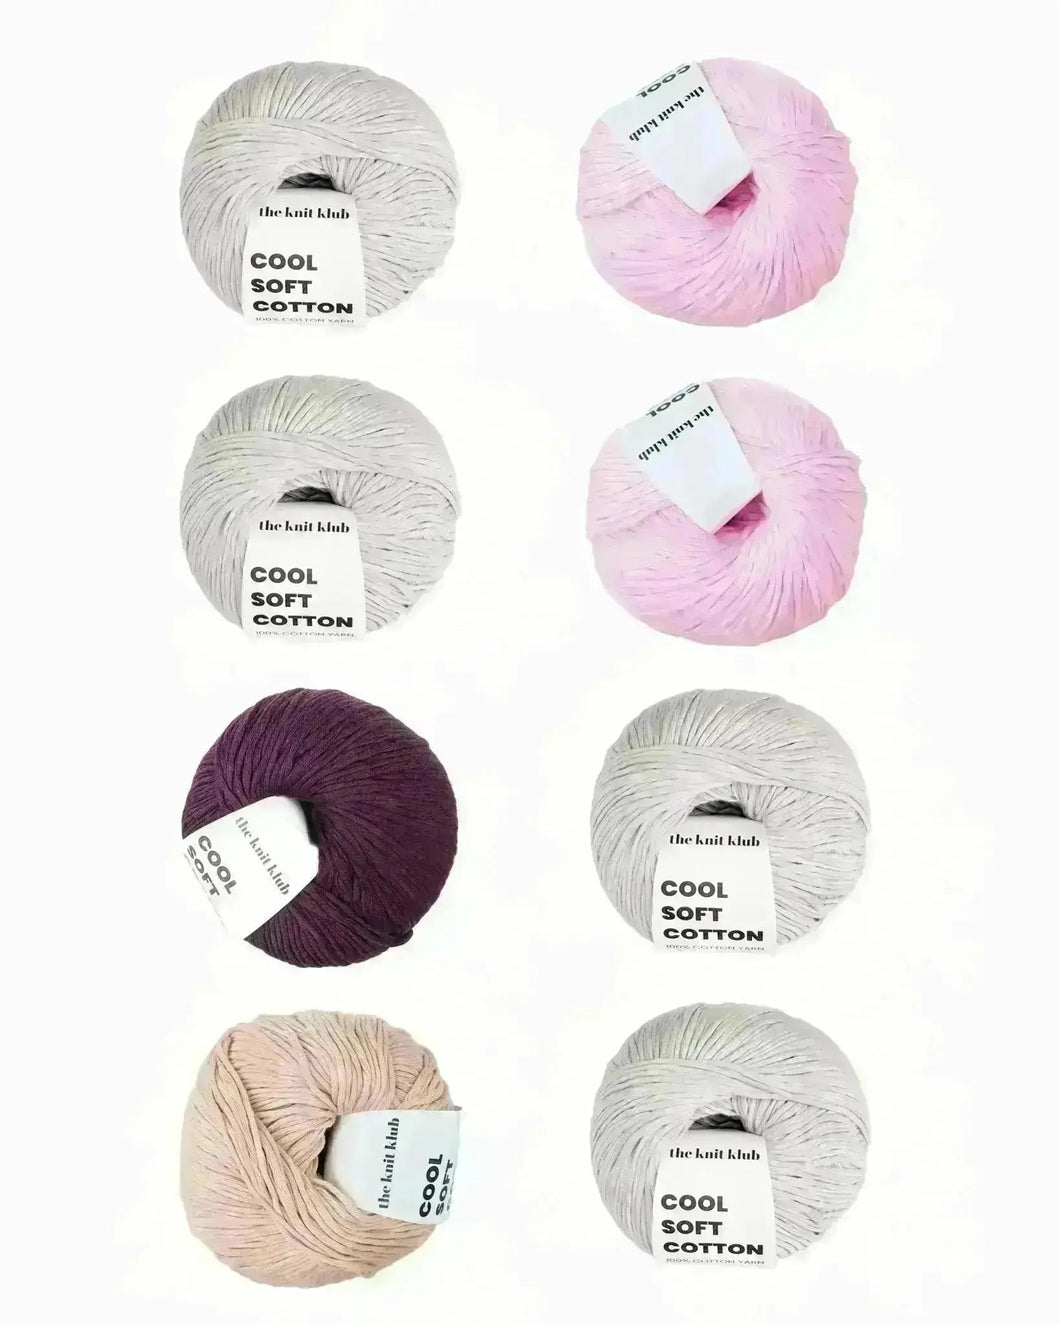 8 - Pack of Cool Soft Cotton Yarn - The Knit Klub Cotton yarn 0